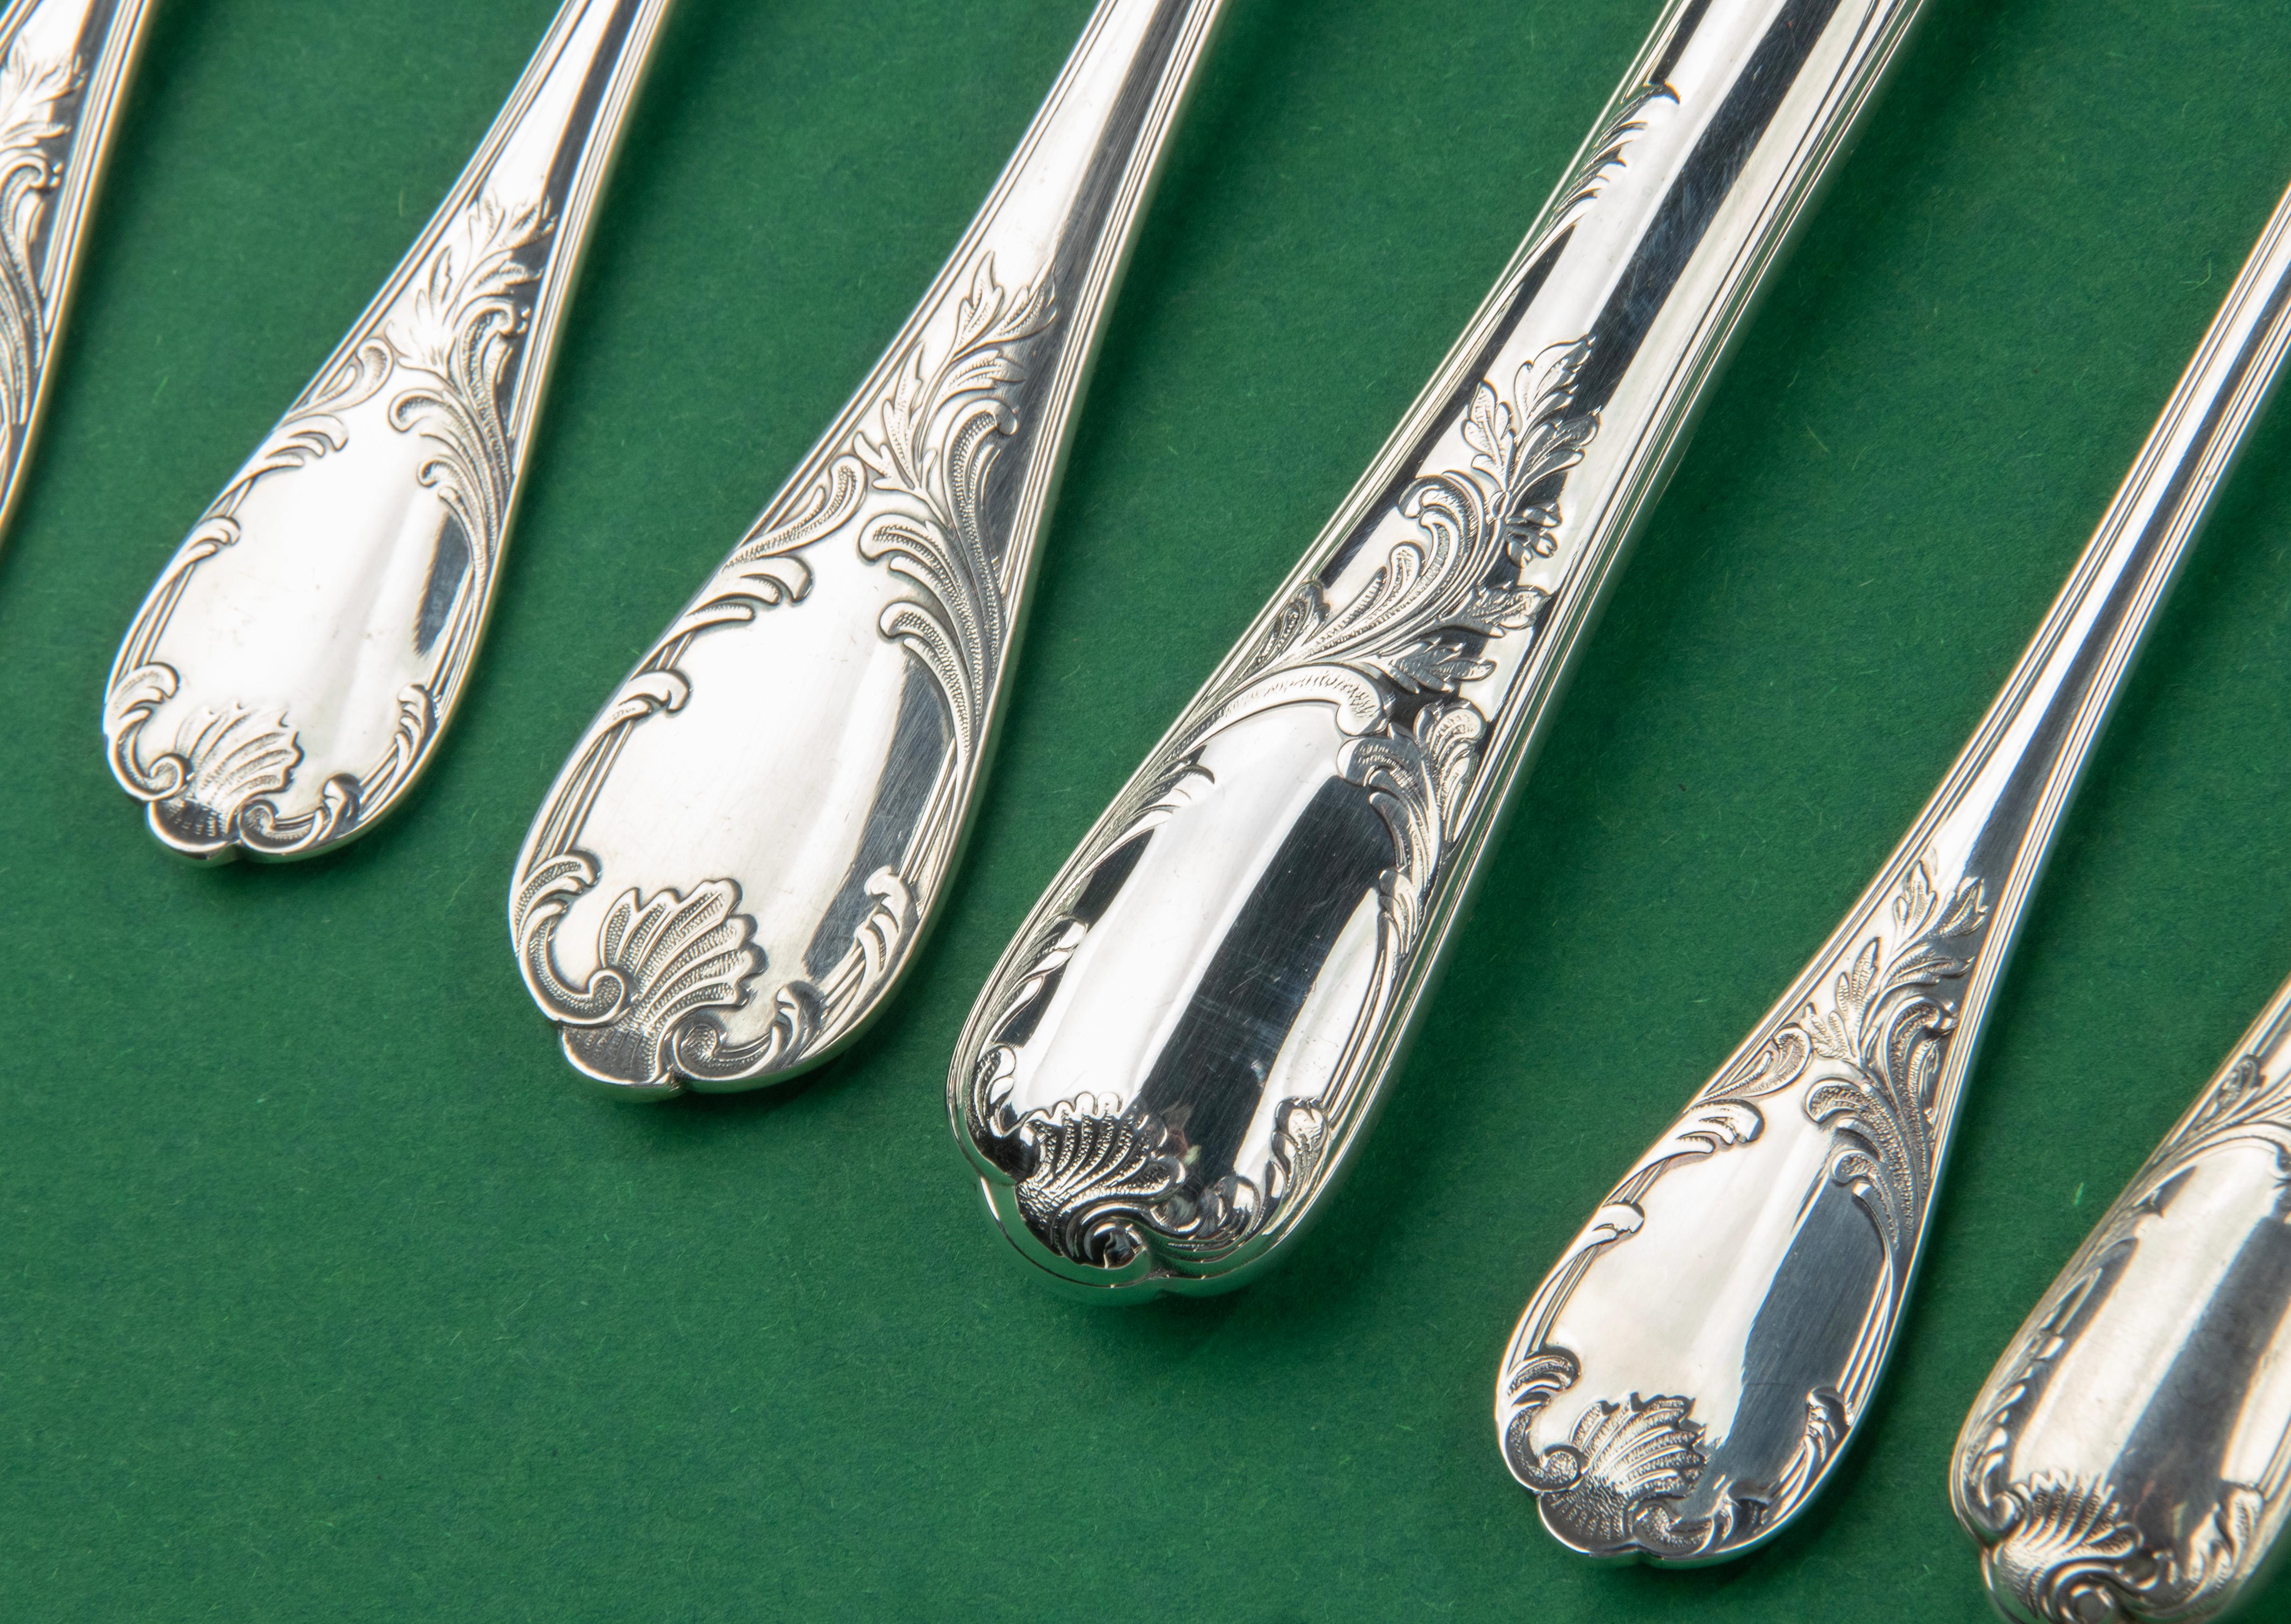 60-Piece Set Silver Plated Flatware - Christofle France - Model Marly 7